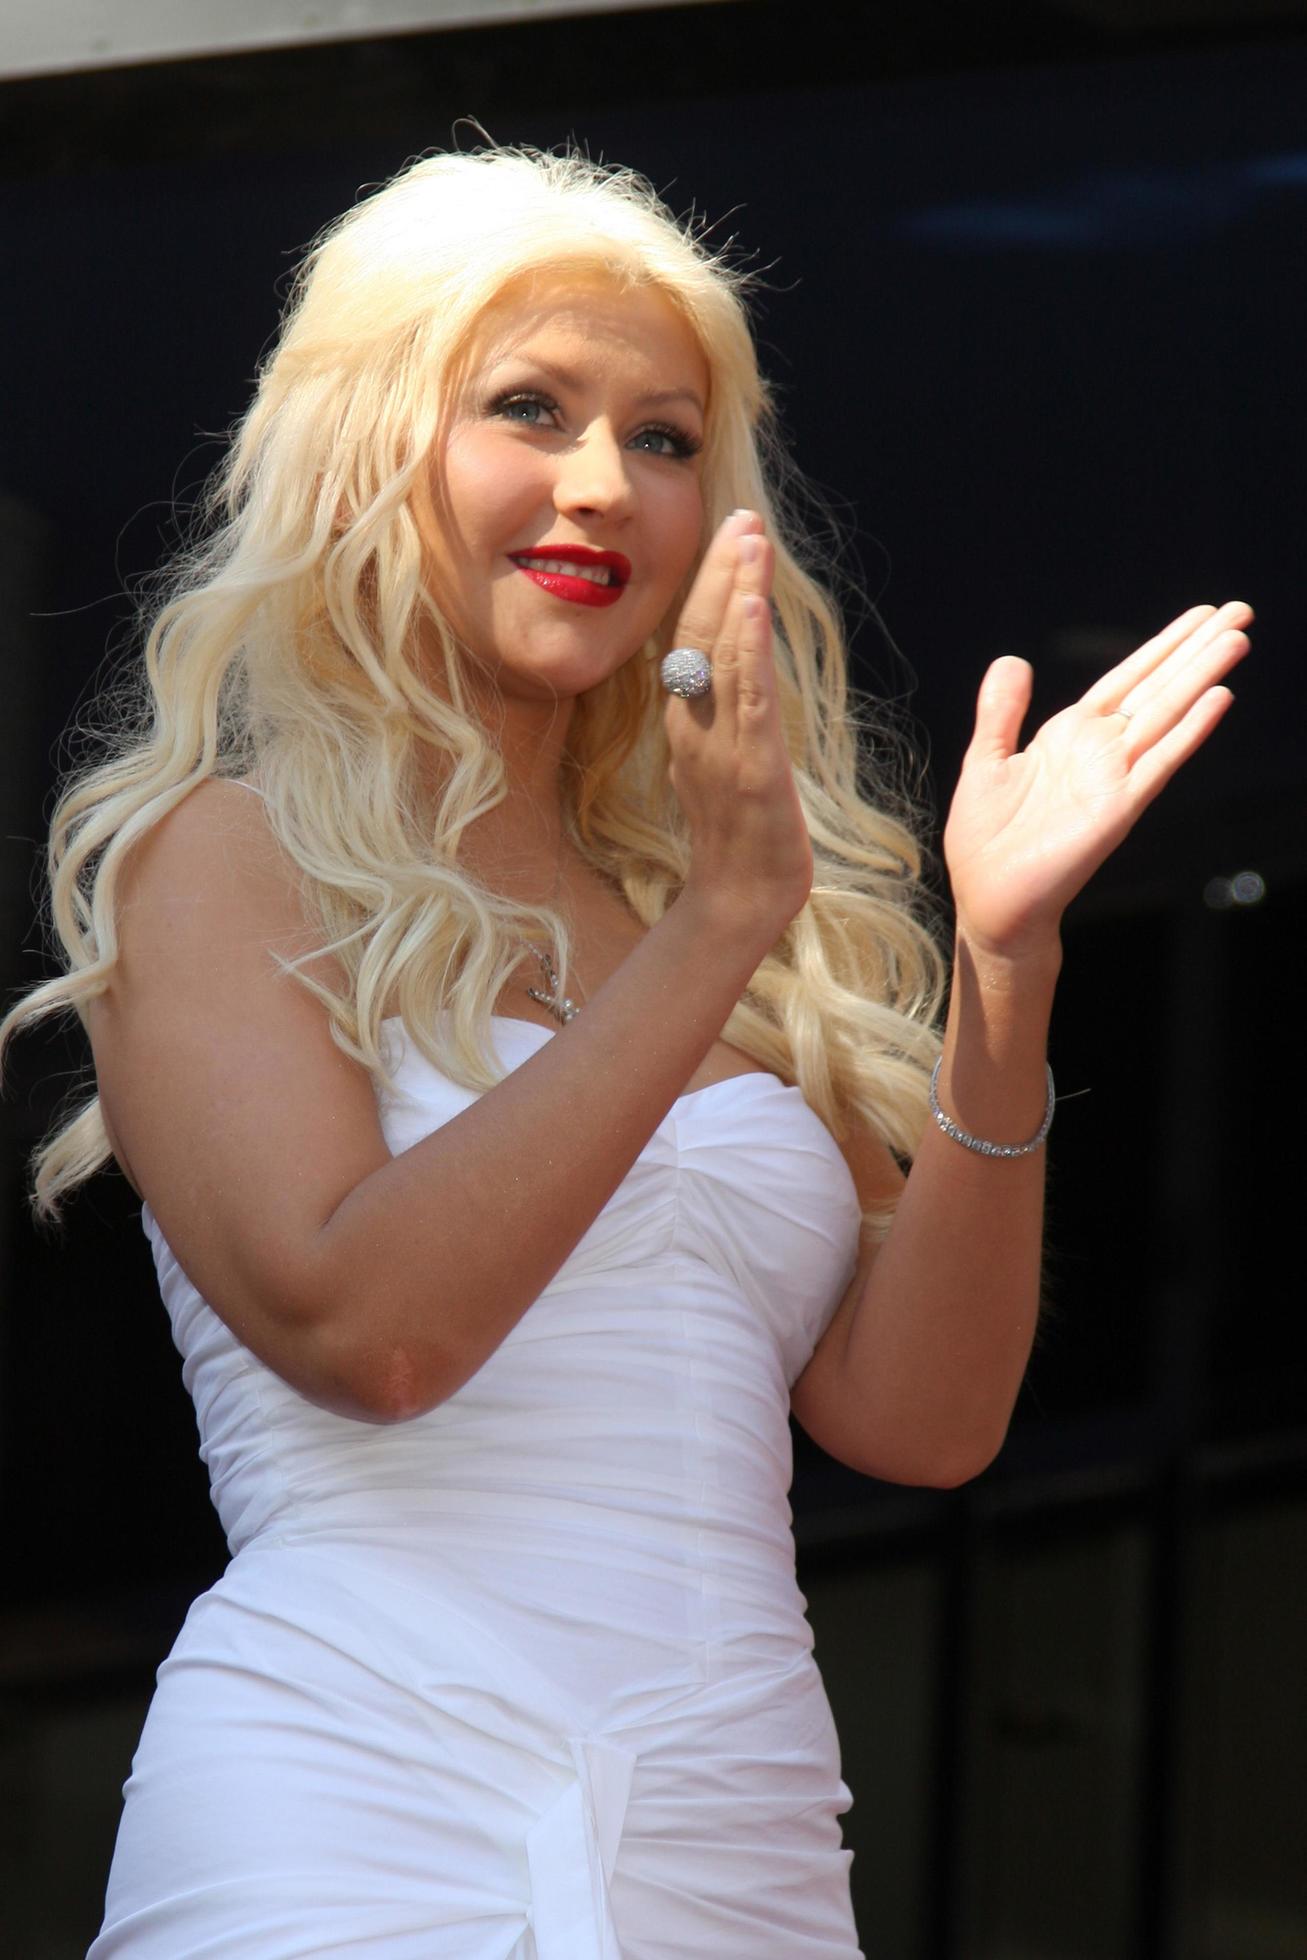 Christina Aguilera's Style: “Burlesque” Premiere & Getting Her Star on the  Walk of Fame, 15/11/10